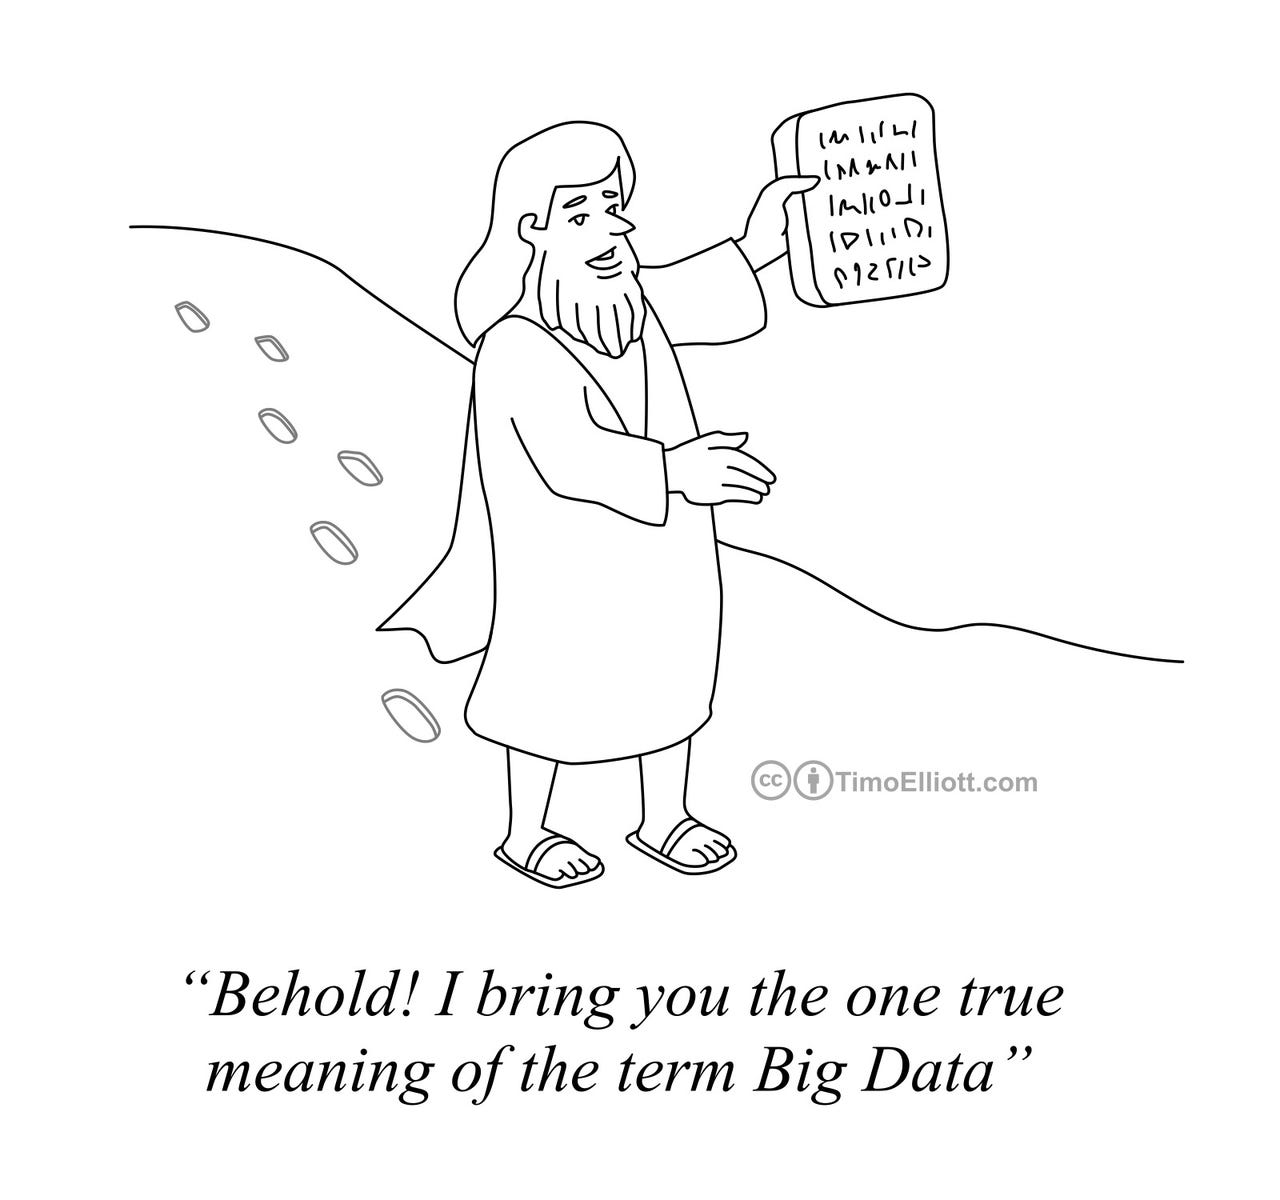 Cartoon: Behold The True Meaning of Big Data!